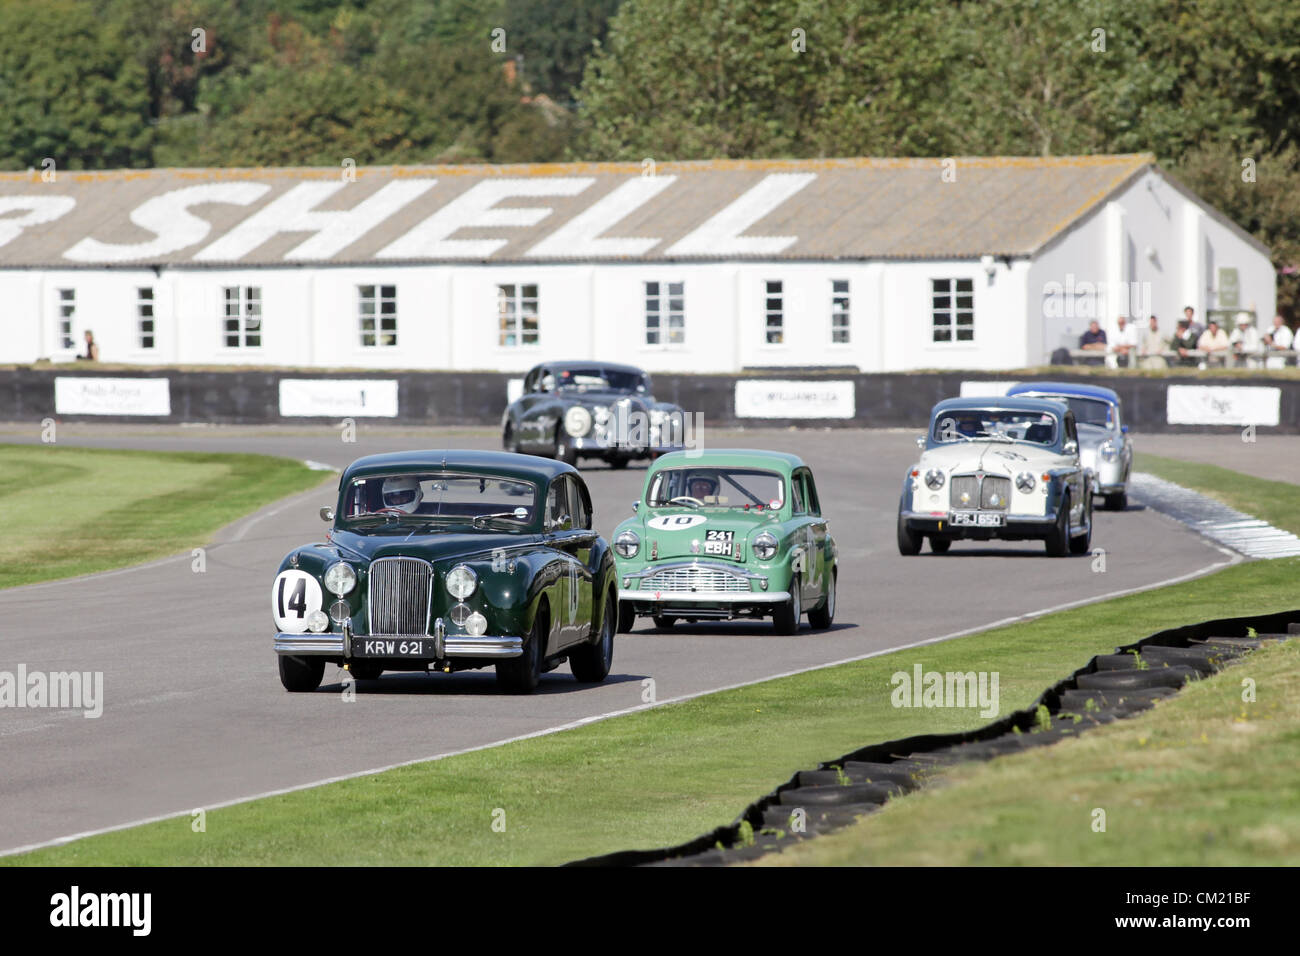 Goodwood Estate, Chichester, UK. 15th September 2012. Rowan Atkinson driving a Jaguar MkV11 is chased by Rauno Aaltonen in a Standard Ten during the St Mary's Trophy at the Goodwood Revival. The revival is a 'magical step back in time', showcasing a mixture of cars and aviation from the 40's, 50's and 60's and is one of the most popular historical motor racing events in the world. For more information visit www.goodwood.co.uk/revival. Stock Photo